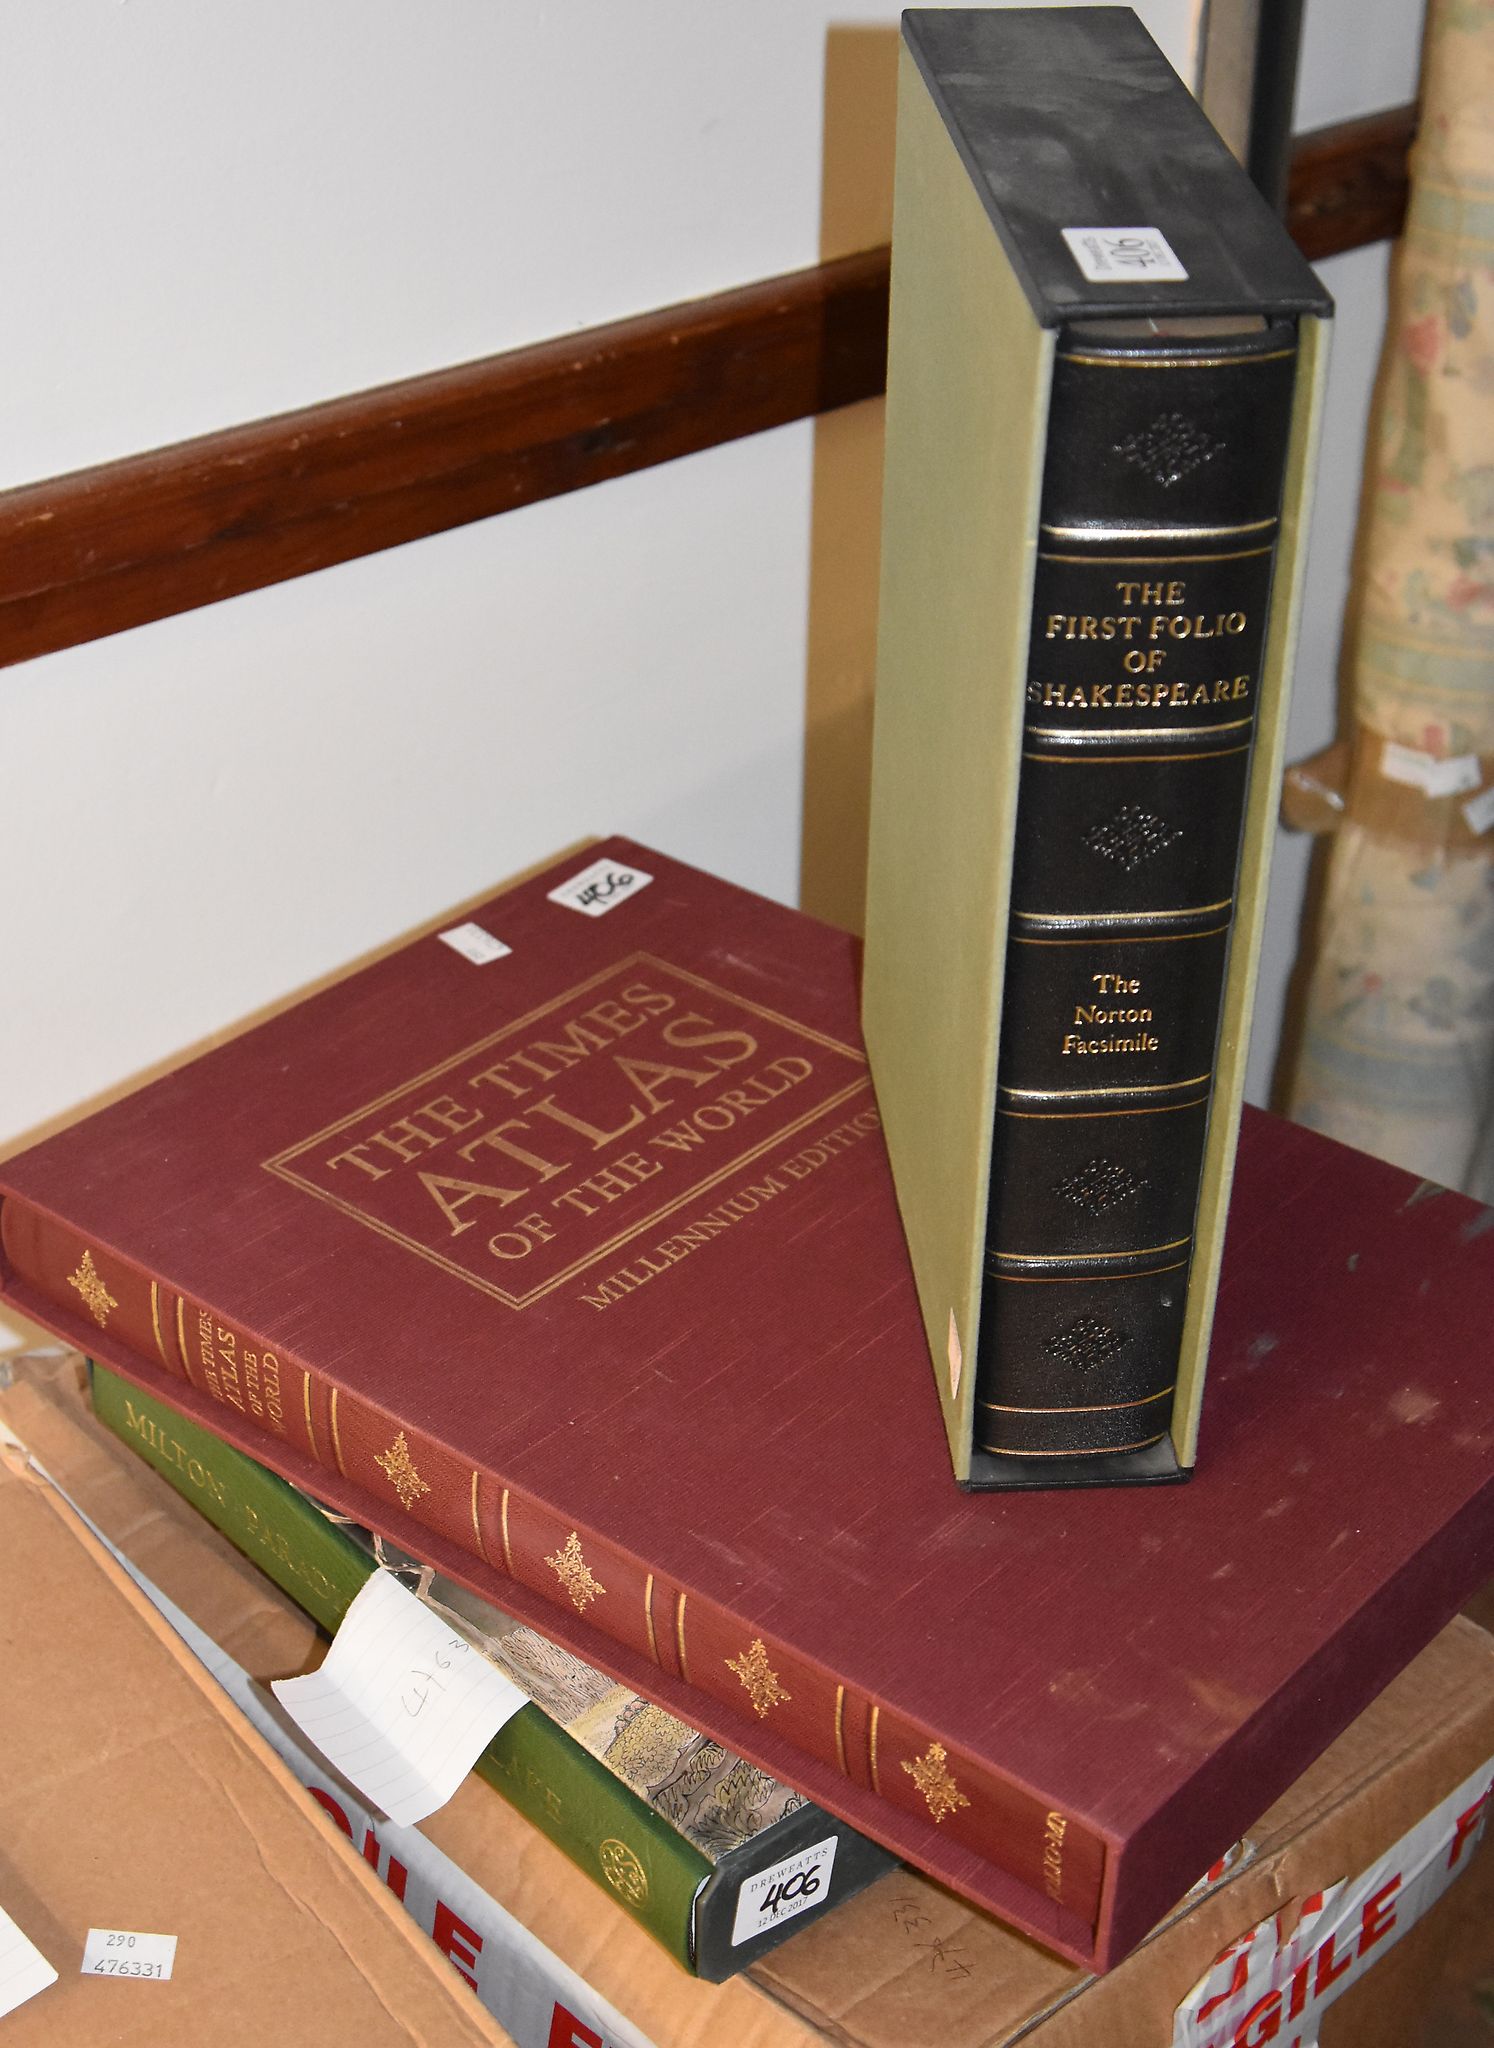 BINDINGS; Quantity of Continental leather bound books v.s. (qty)